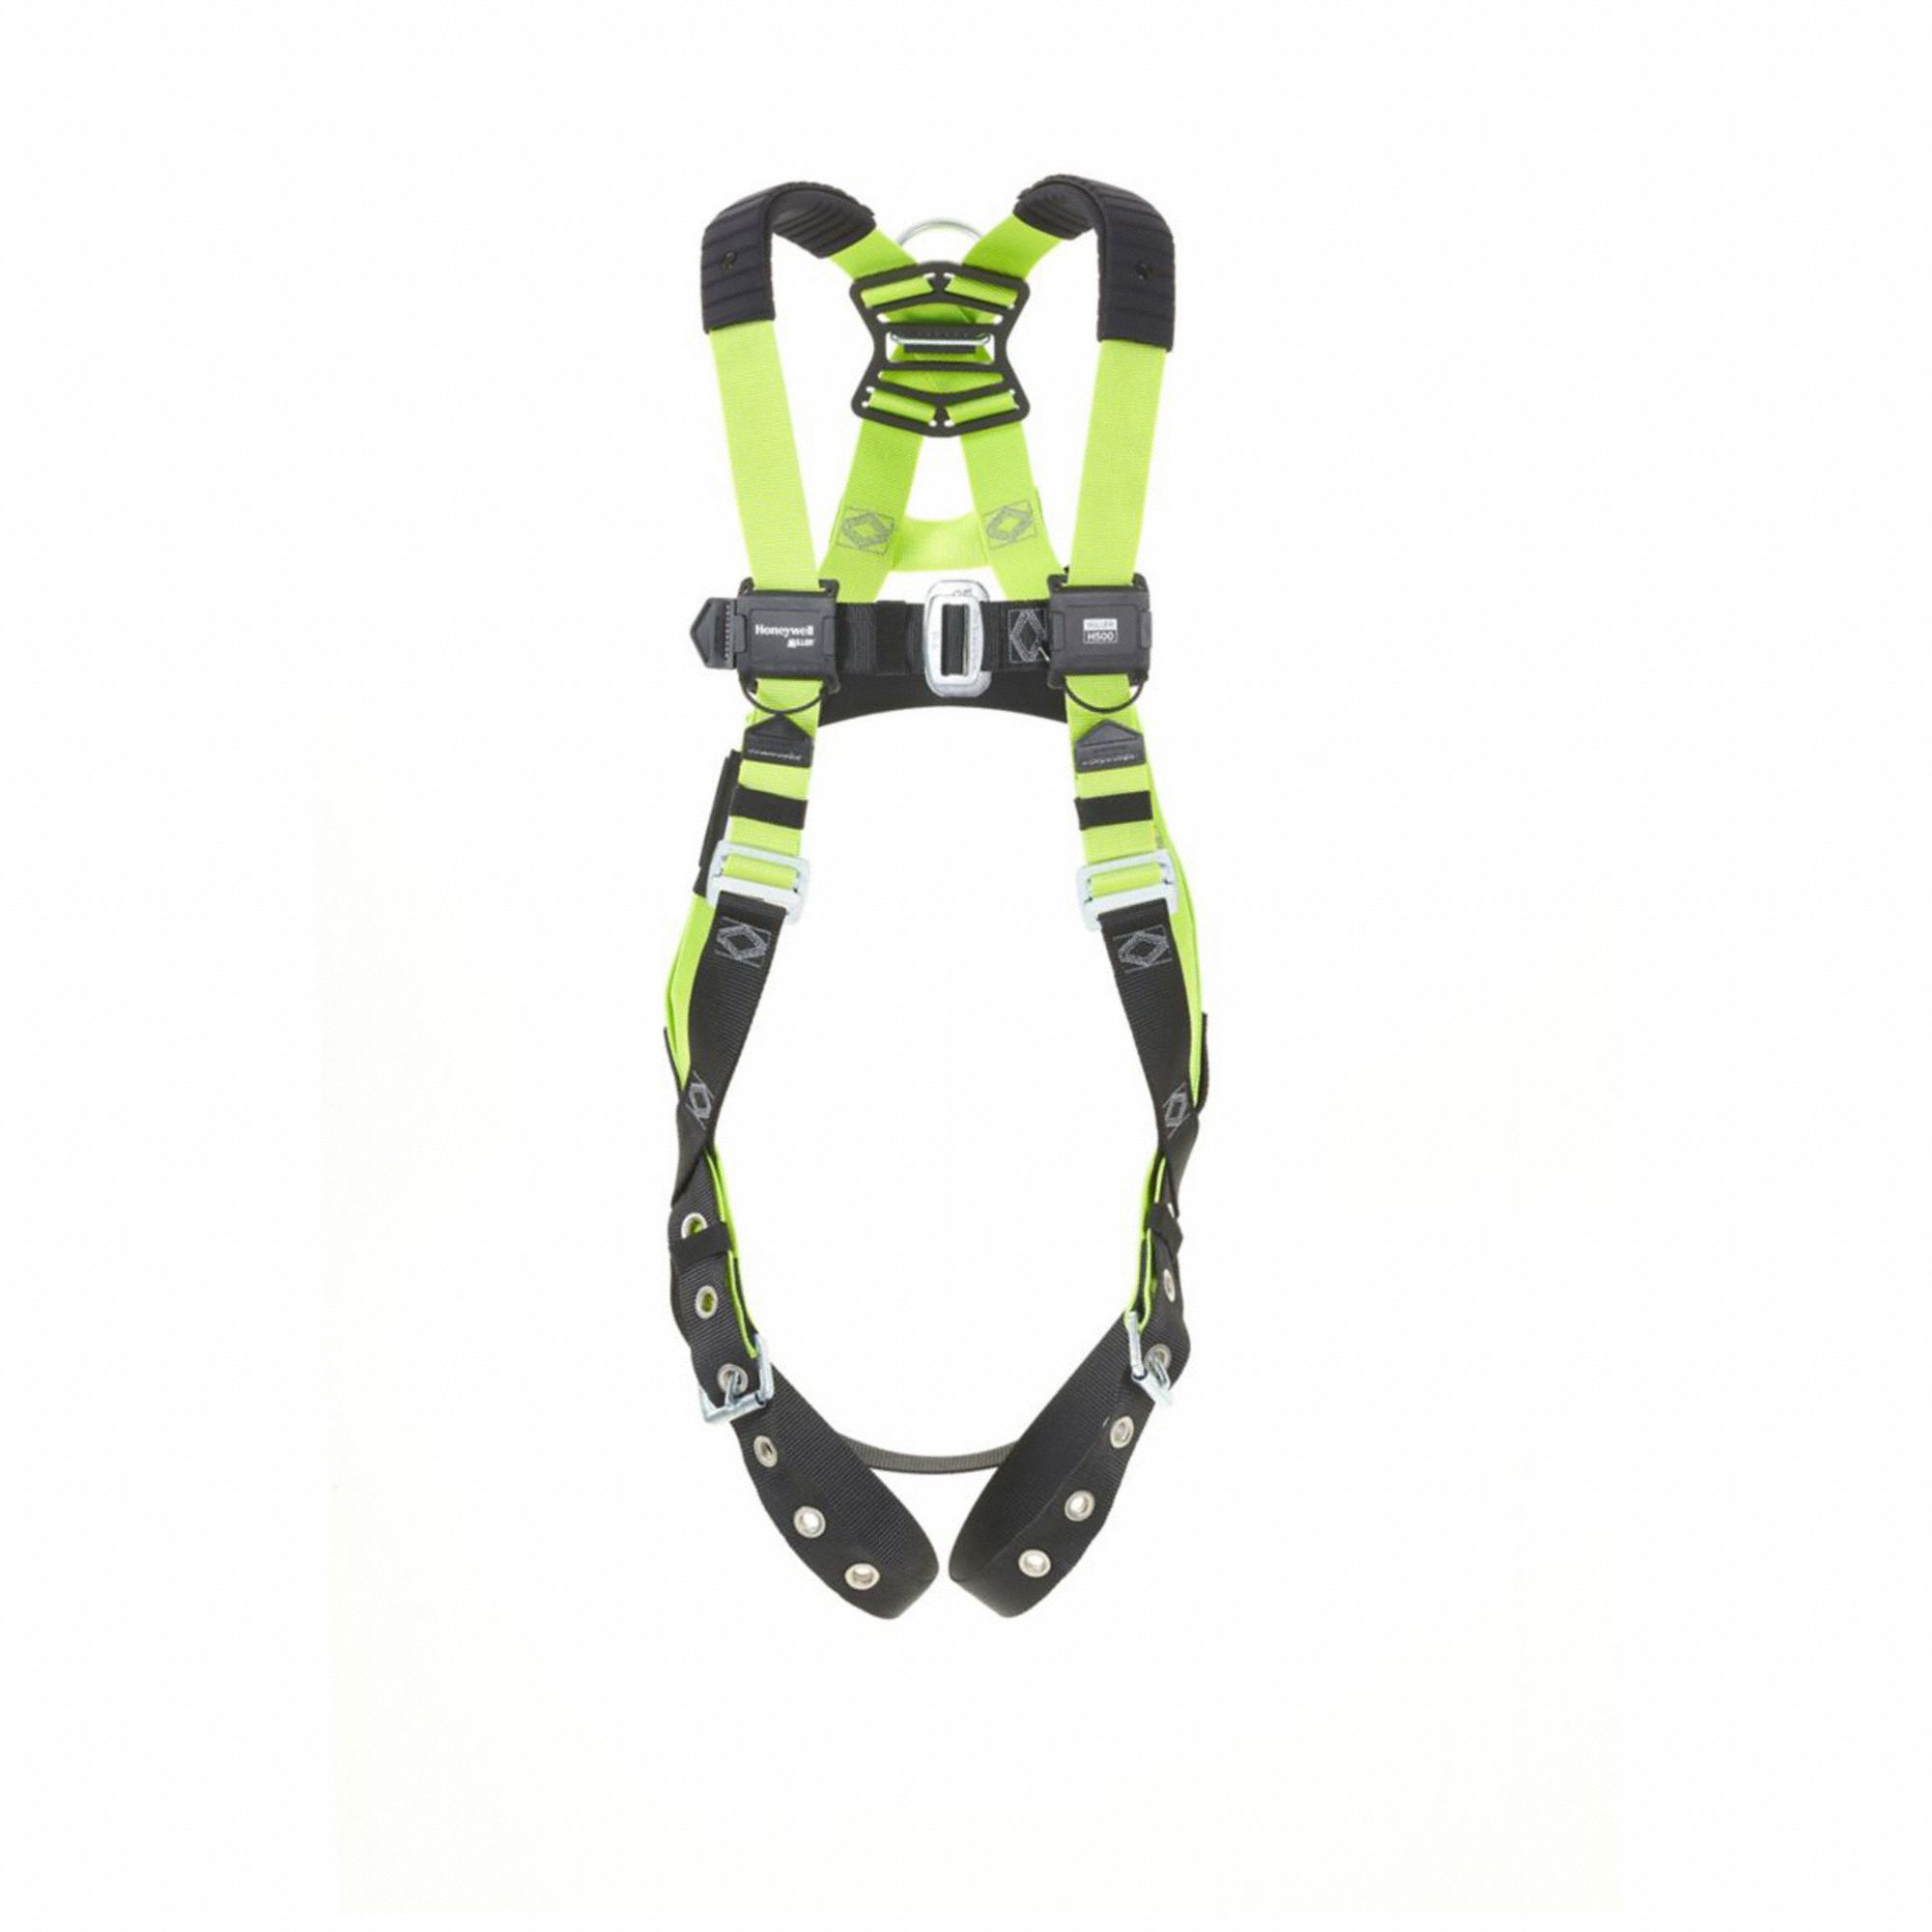 HONEYWELL MILLER FALL ARREST HARNESS, QUICK-CONNECT, 420 LB, YELLOW,  UNIVERSAL, STEEL W SPECIALLY FORMULATED WEBBING Safety Harnesses  MLRH5ISP221022 H5ISP221022 Grainger, Canada